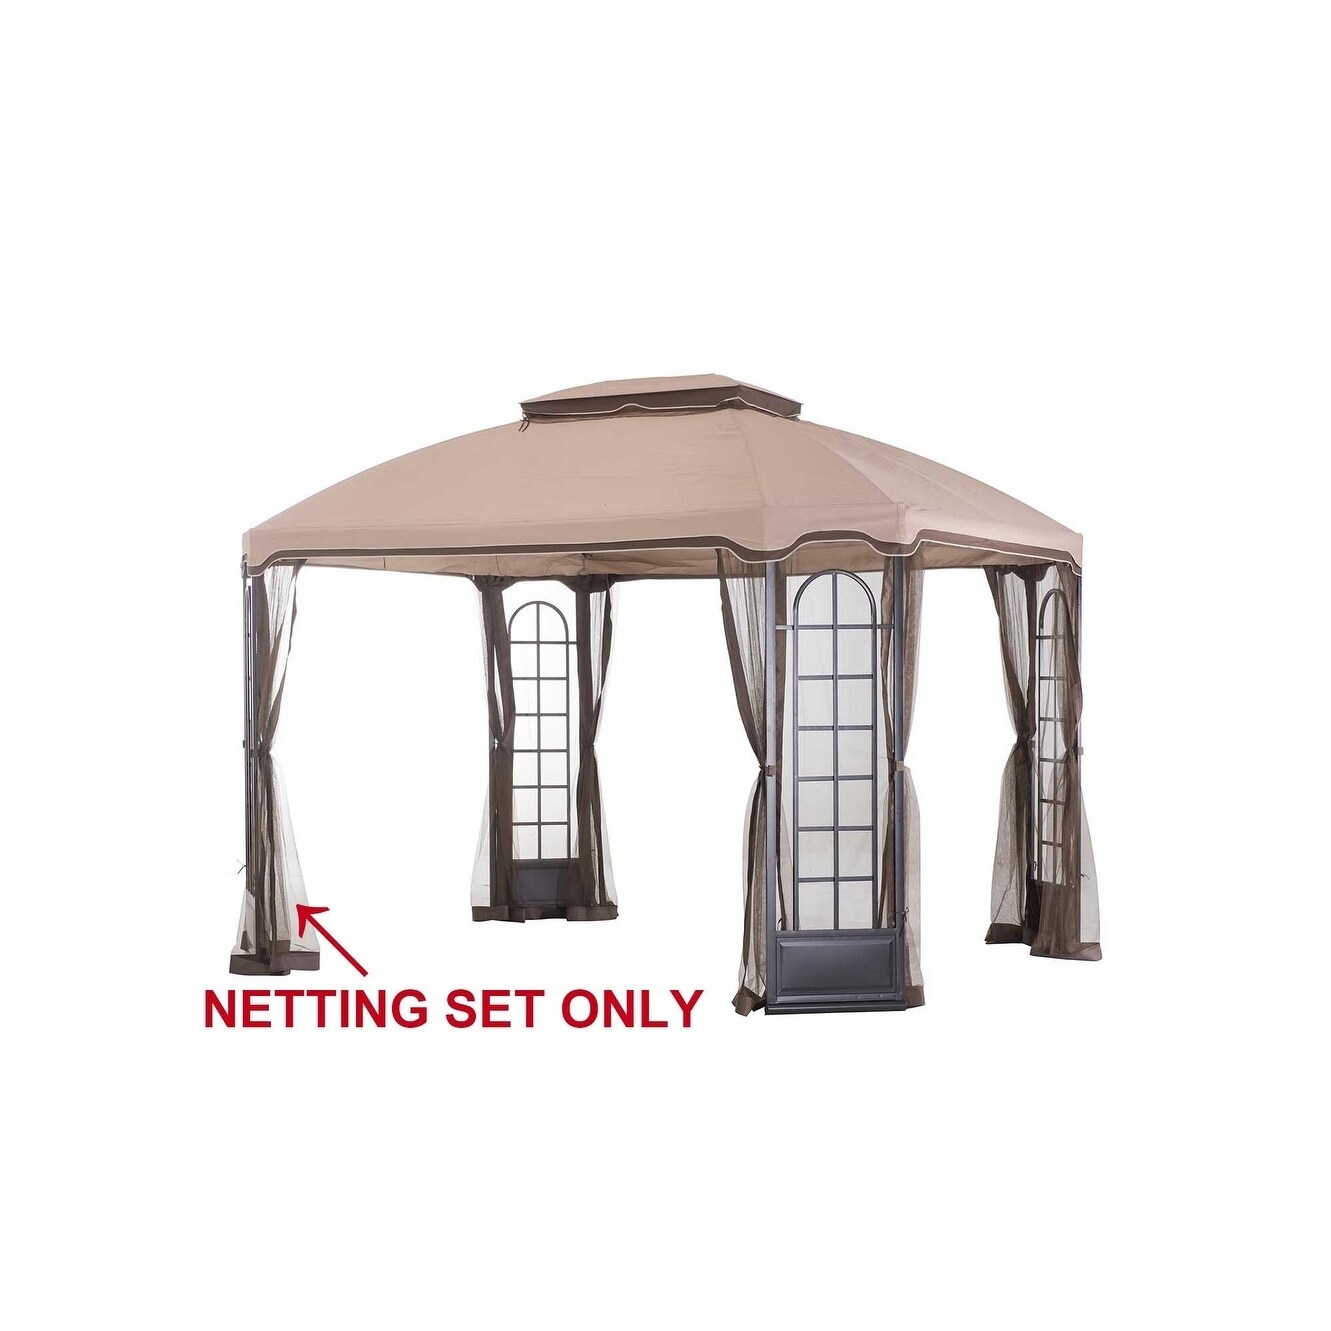 Sunjoy Replacement Mosquito Netting for 10x12 ft Windsor Gazebo